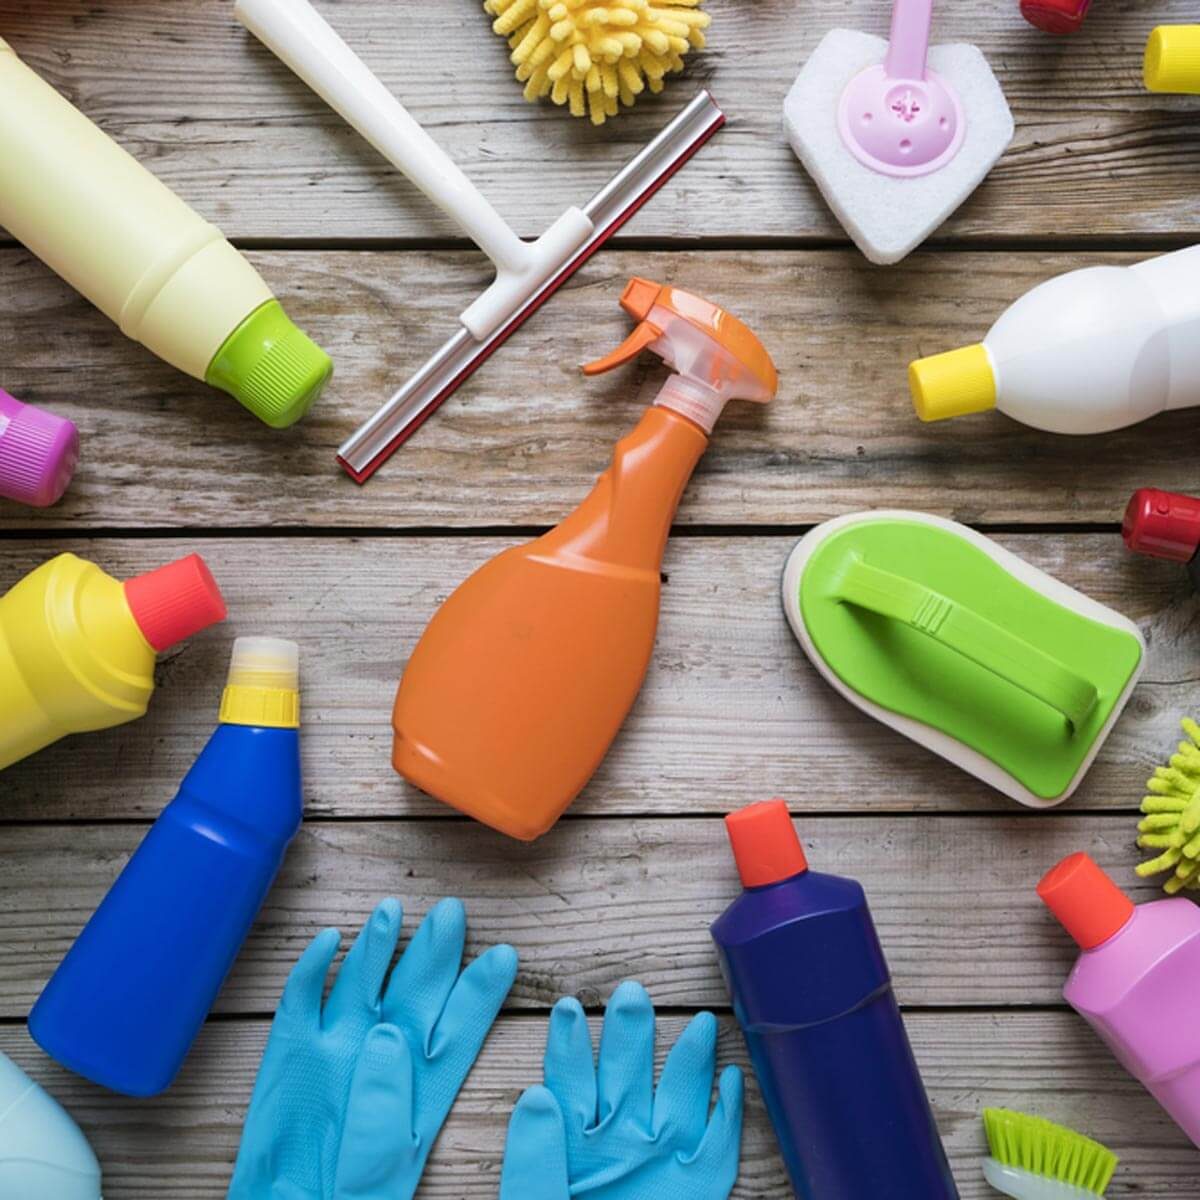 7 Common Cleaning Hacks You Should Never Try, According to Experts